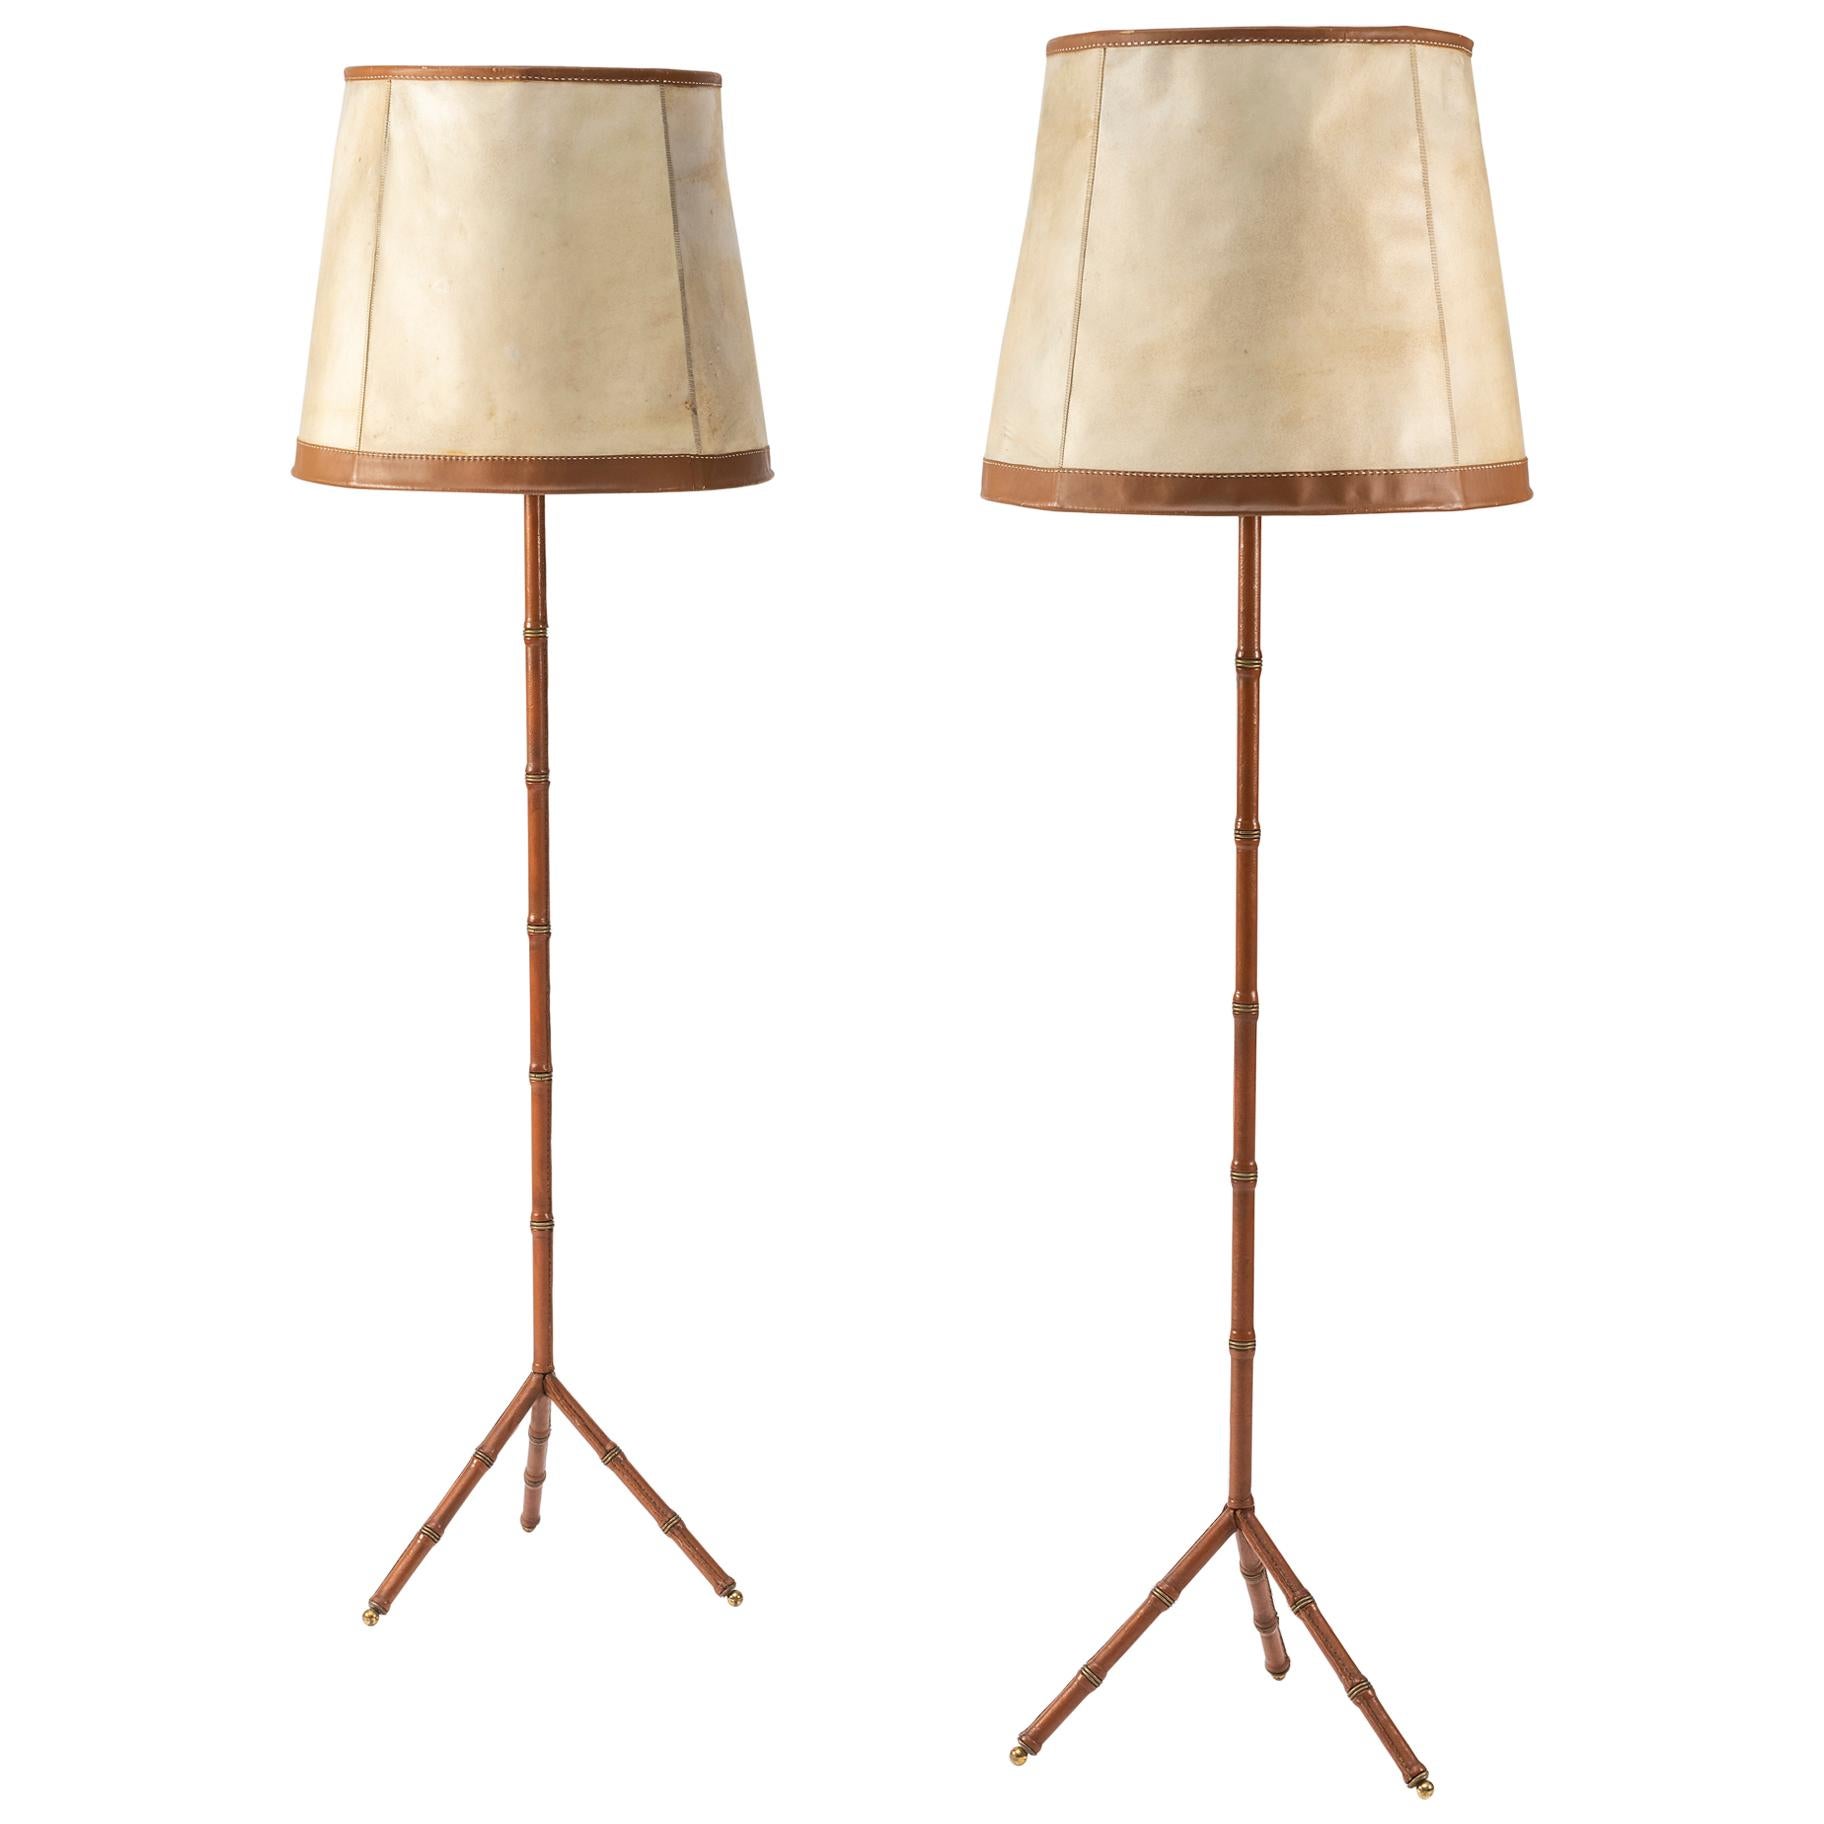 Pair of Jacques Adnet Leather Floor Lamps